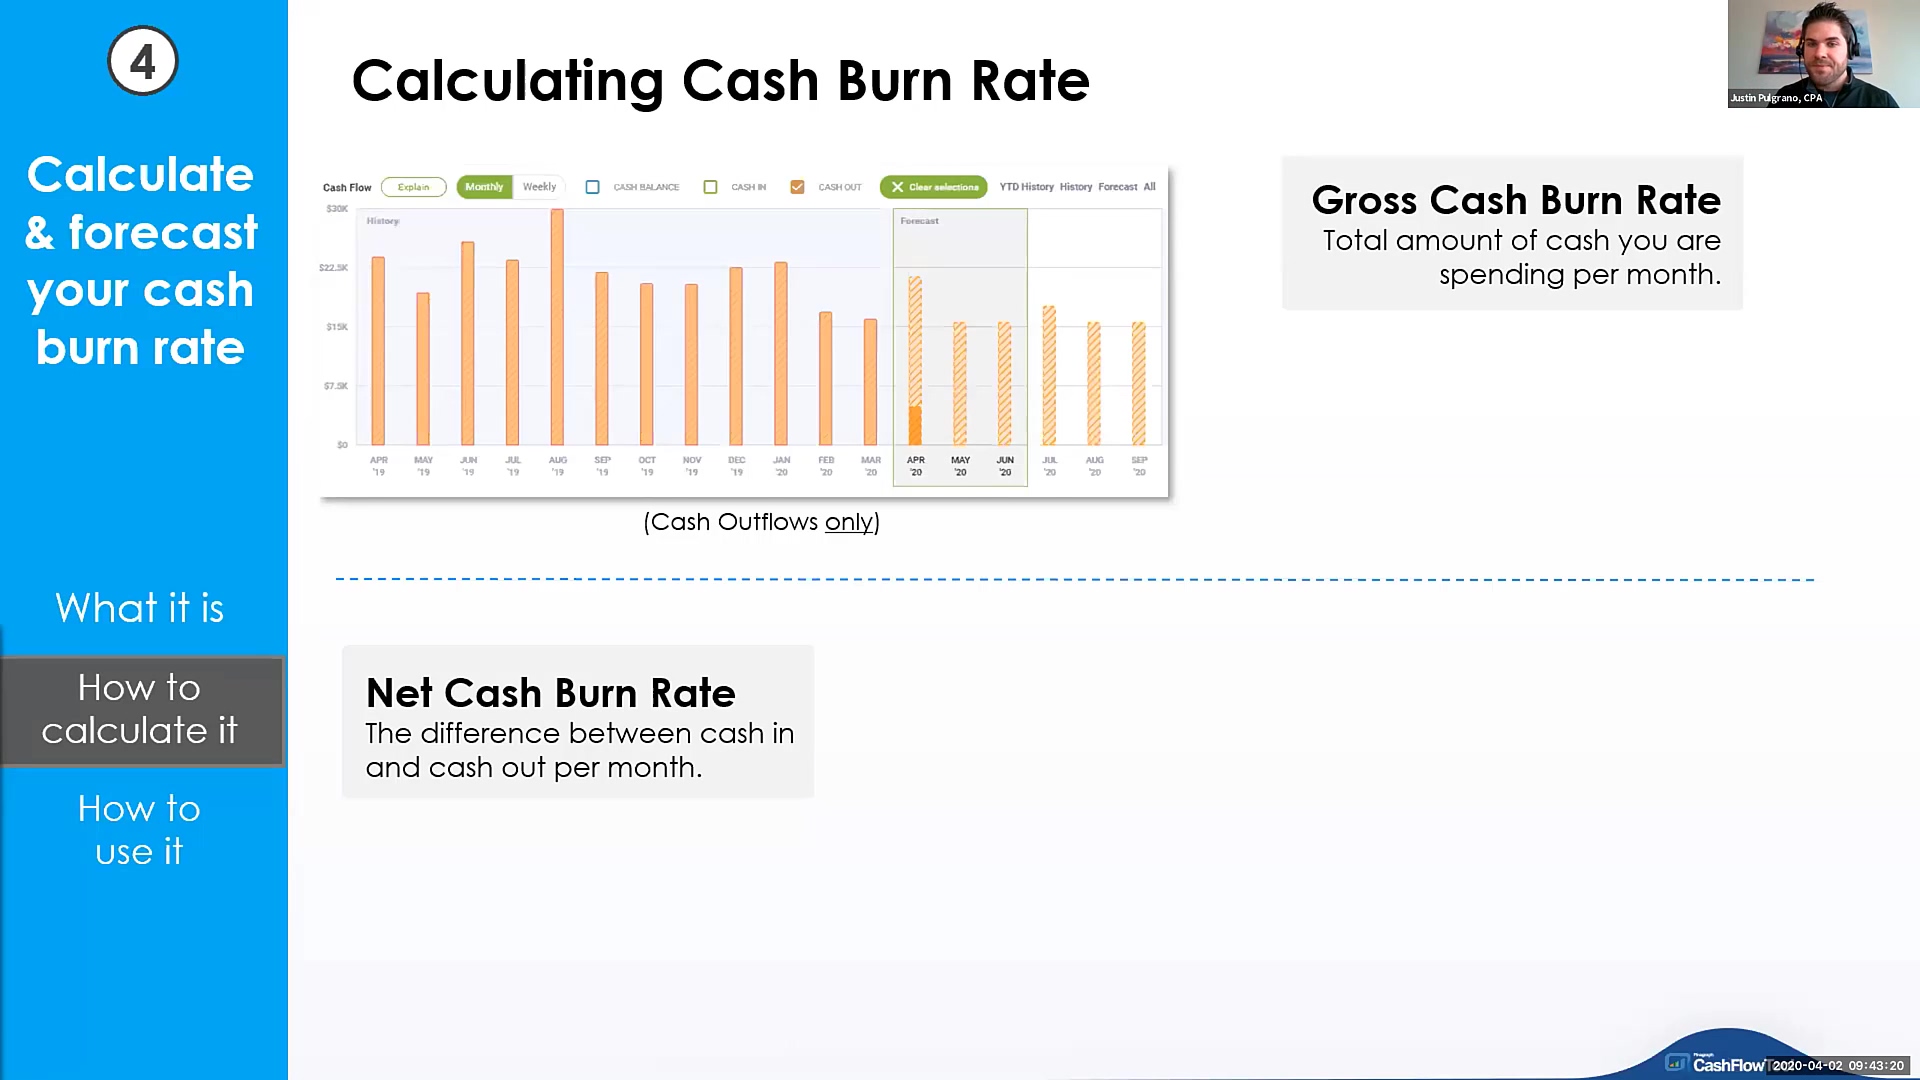 Calculate and forecast your cash burn rate